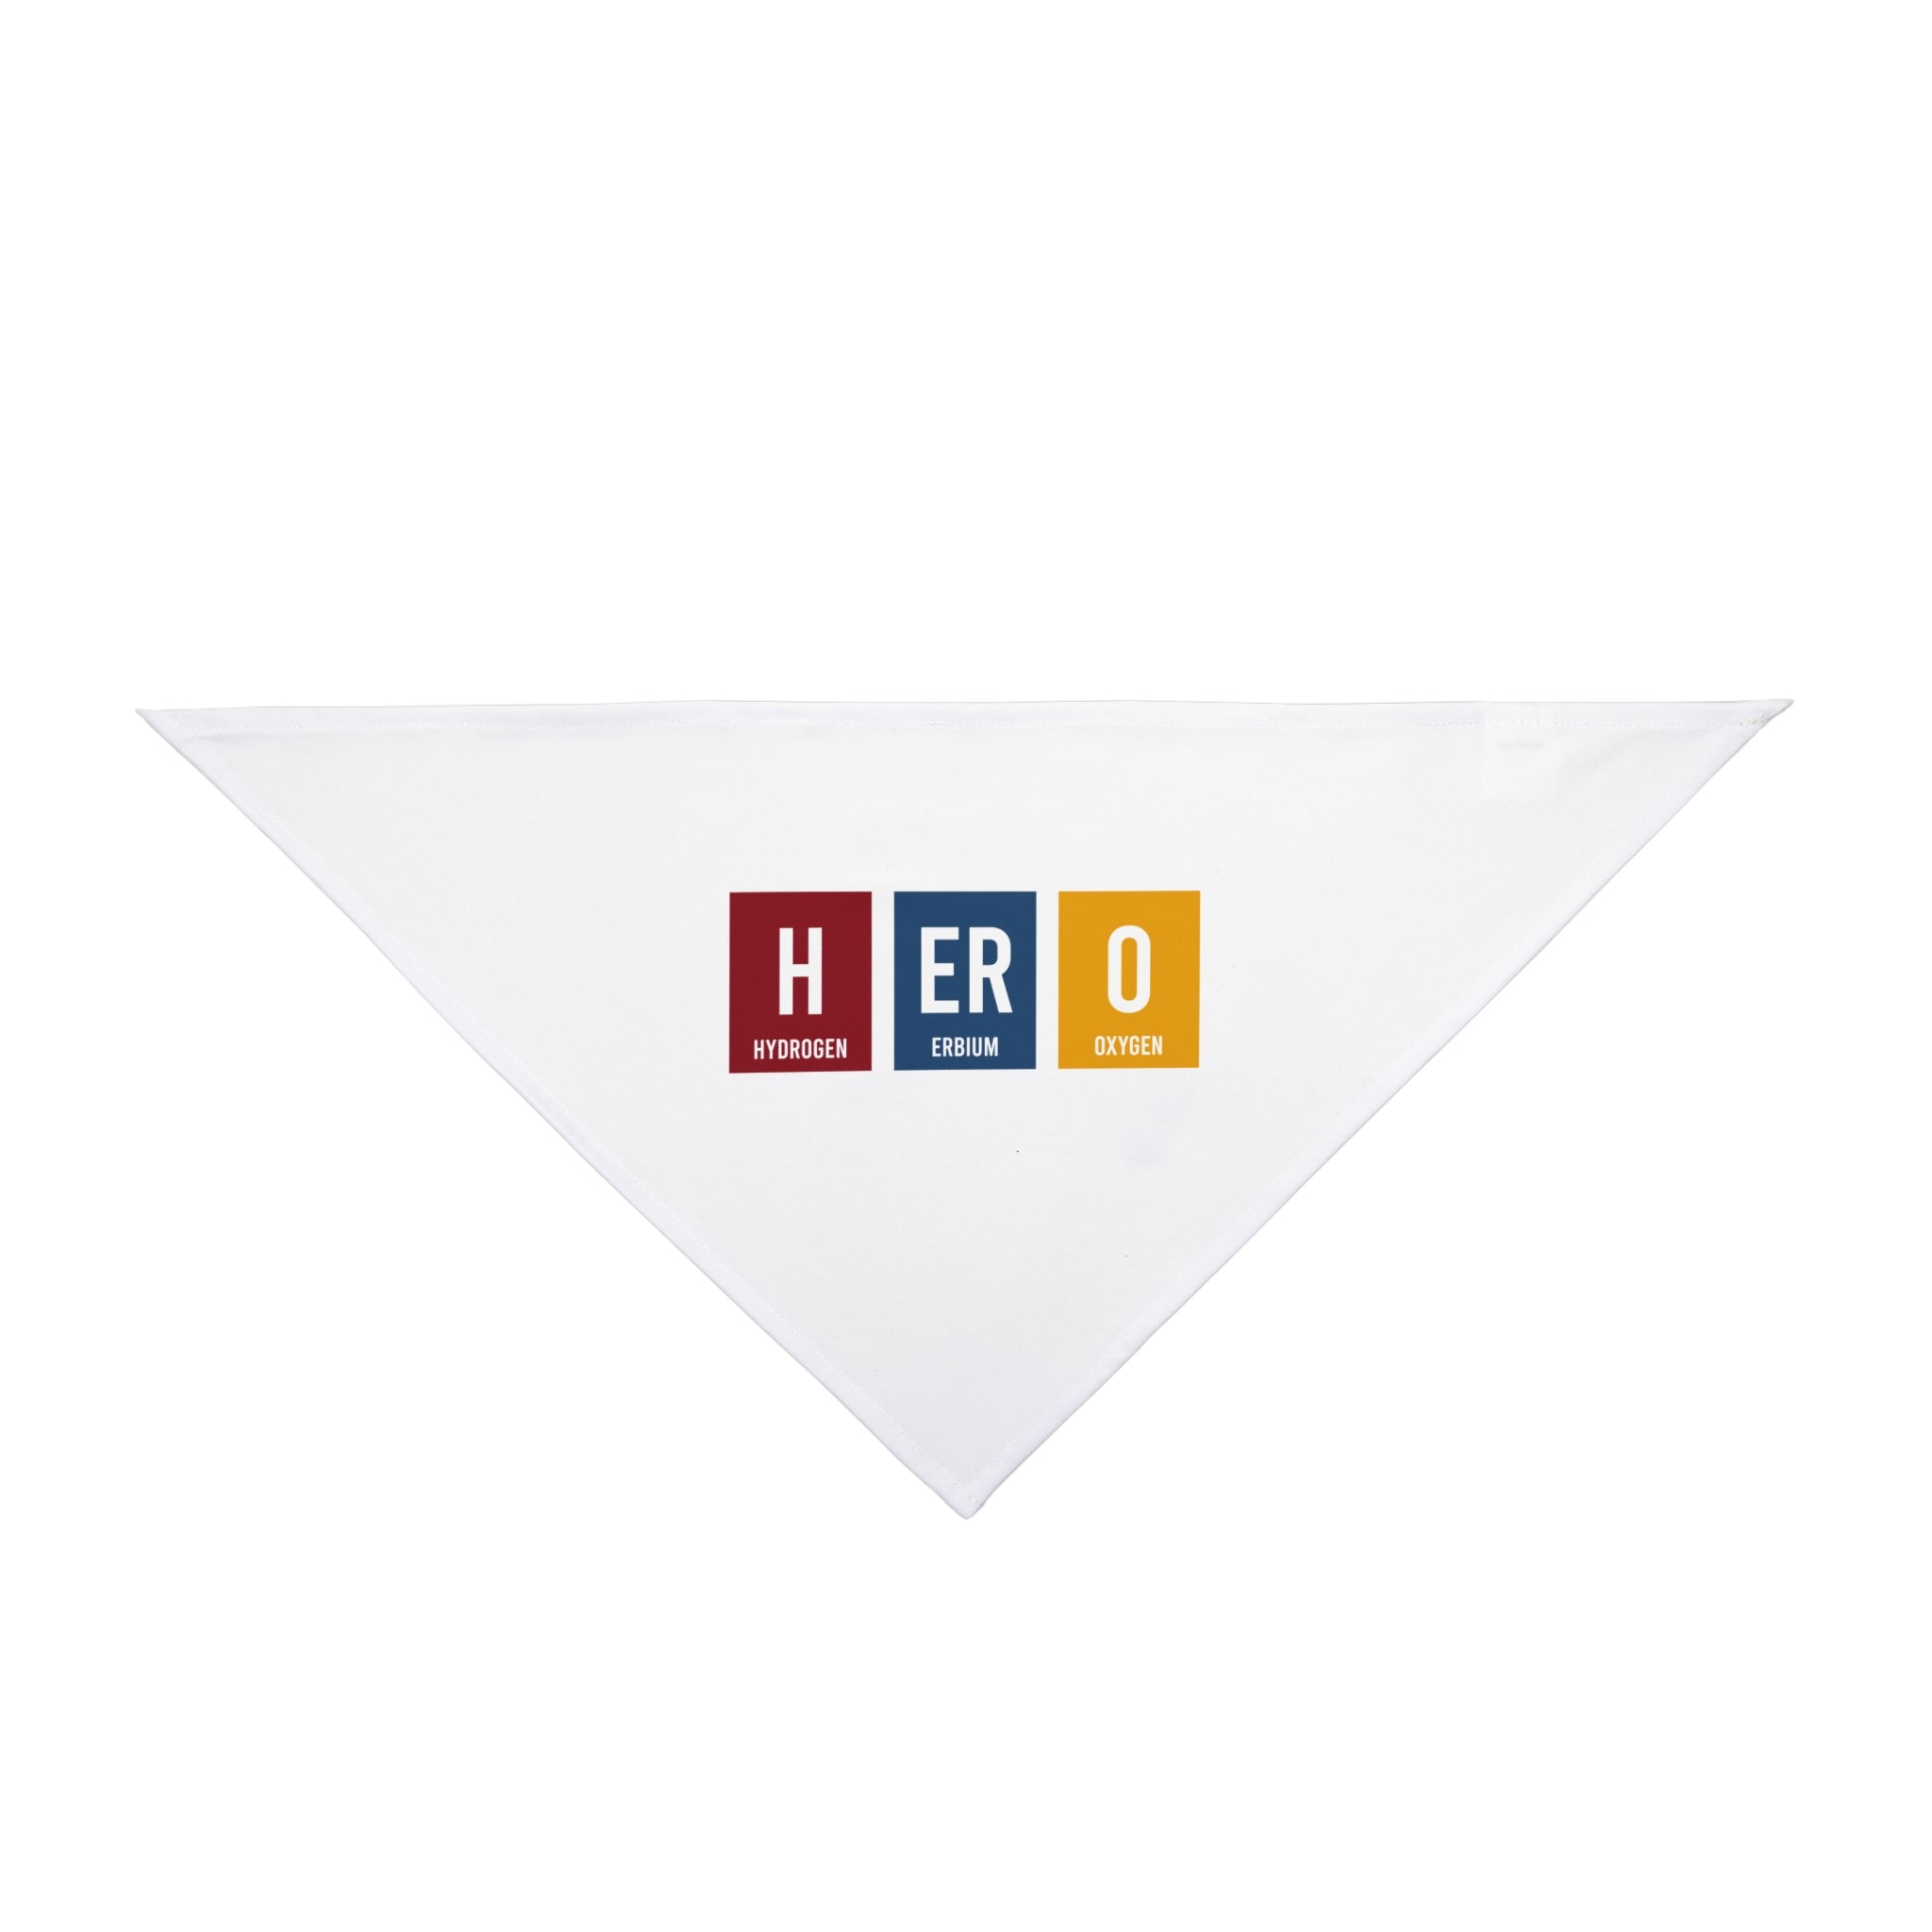 A white triangular HERO - Pet Bandana made of soft-spun polyester featuring the word "HERO" spelled out in colored blocks with hydrogen (H), erbium (Er), and oxygen (O) from the periodic table of elements.